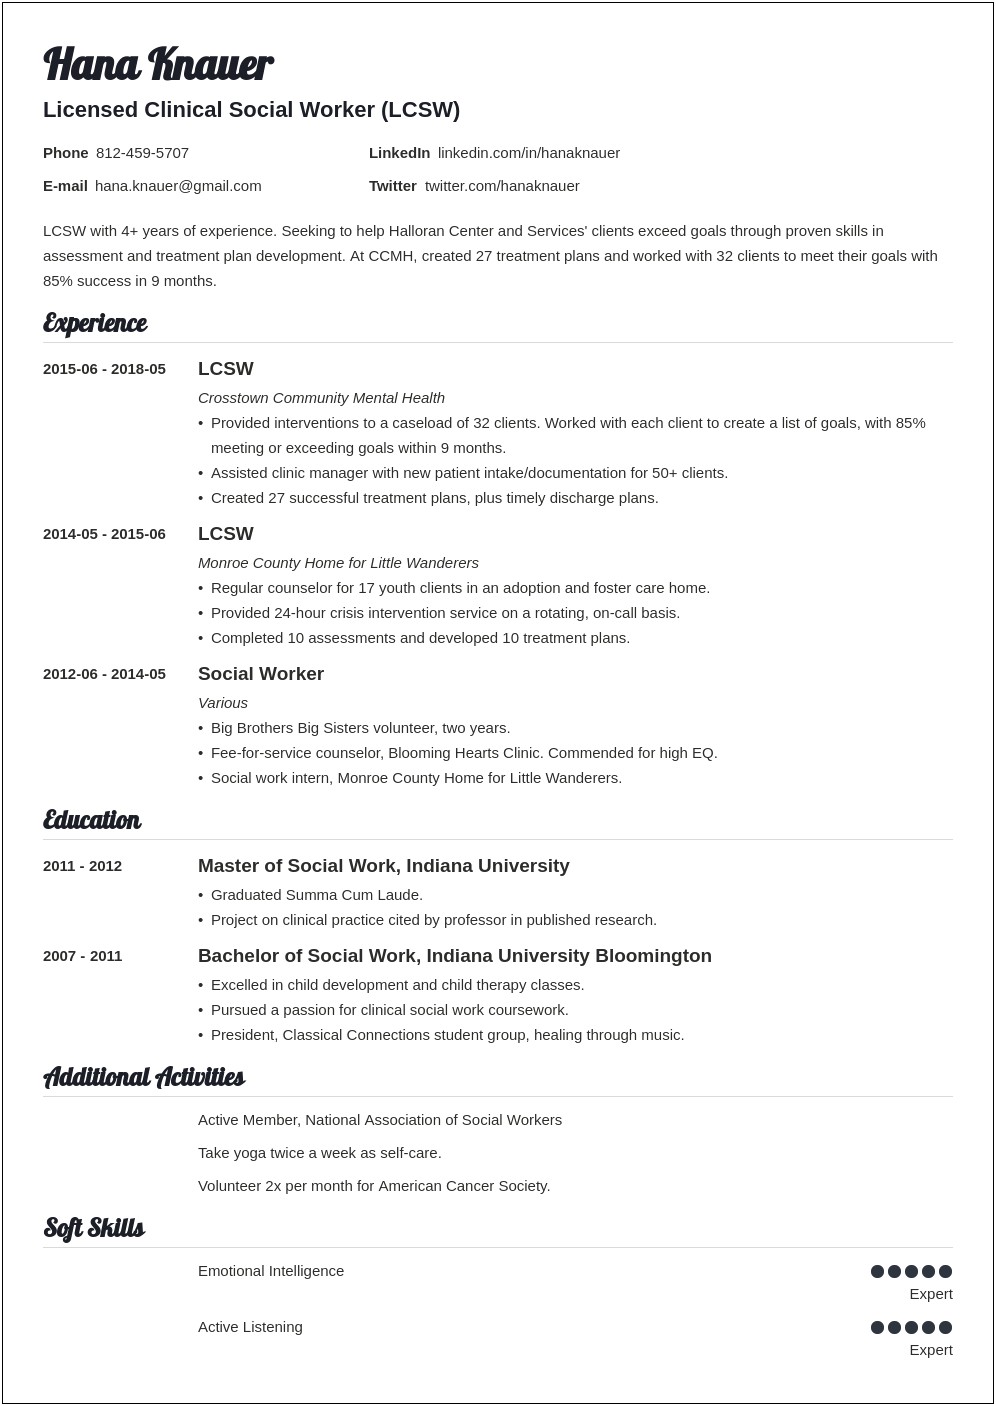 Best Resume Style For Clinical Social Workers